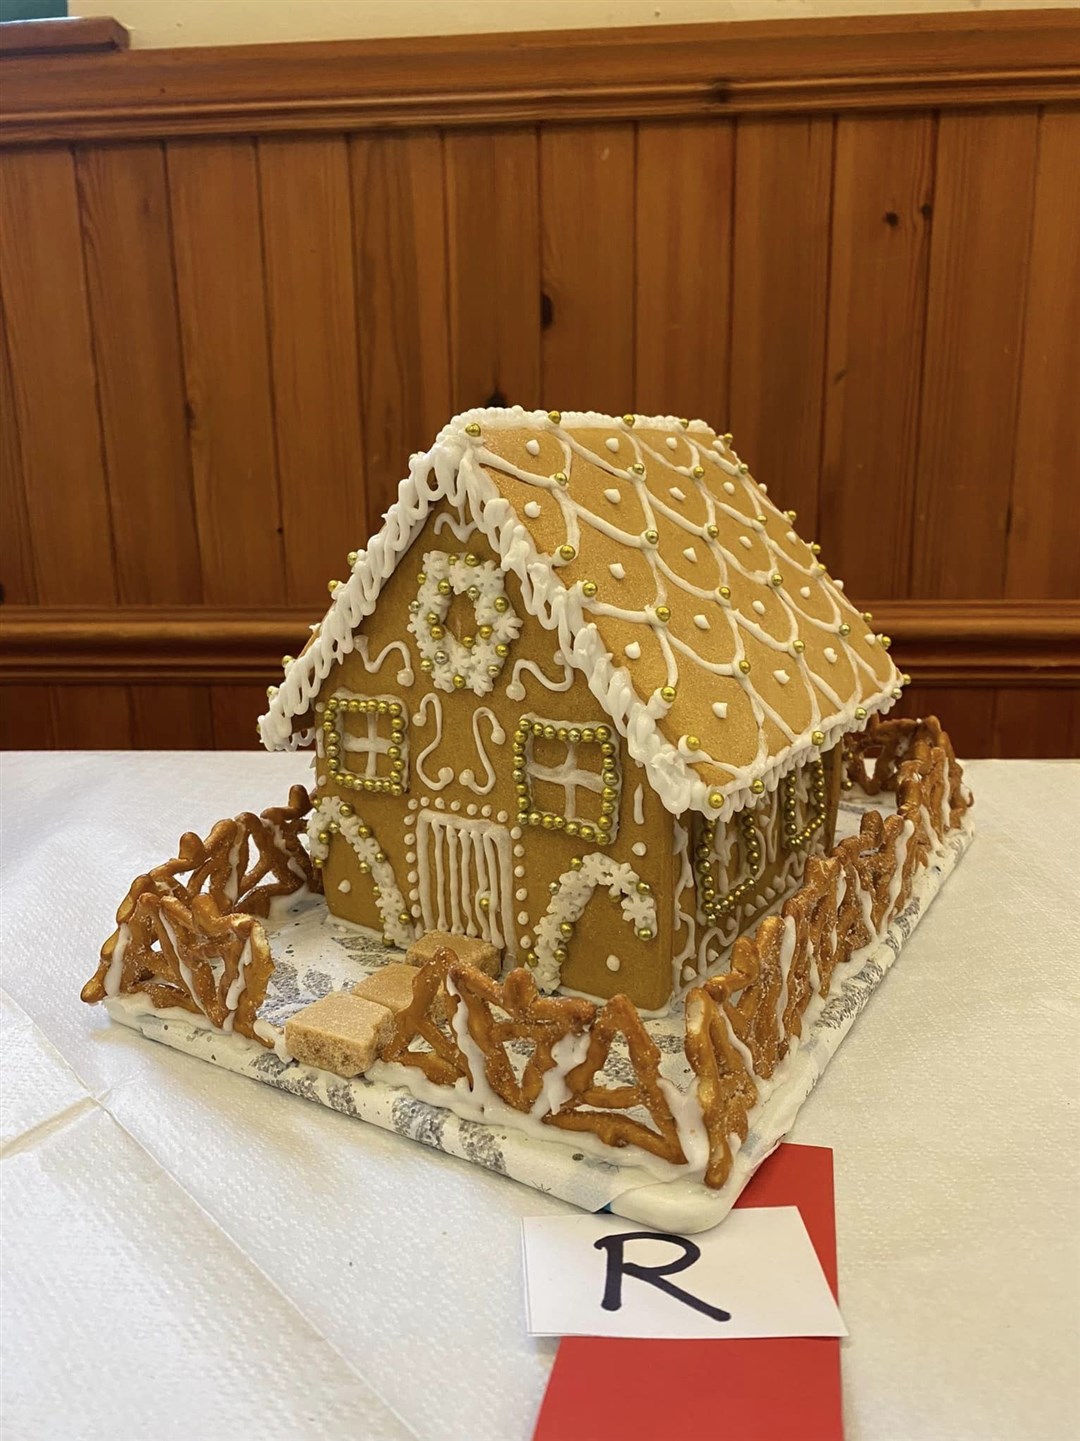 Rowena Fellows scooped 1st prize for her decorative gingerbread house.